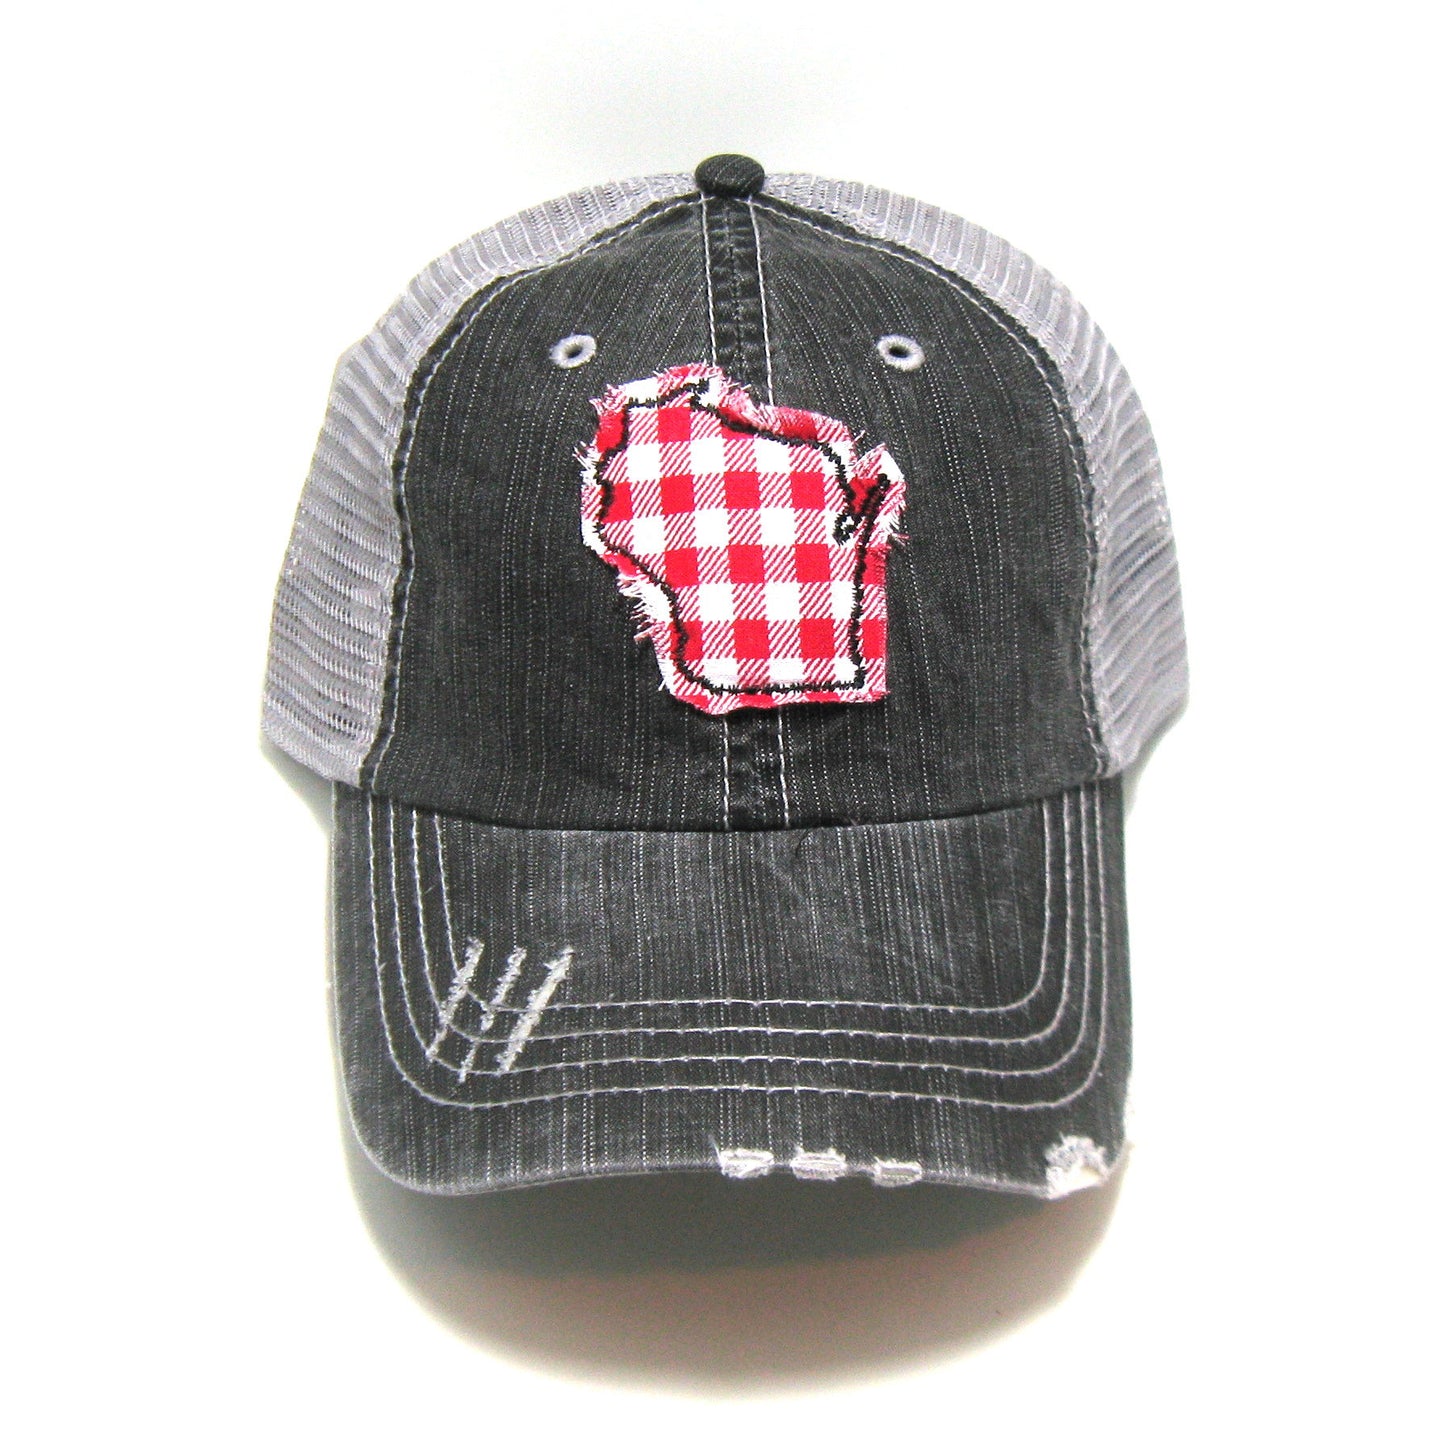 Gray Distressed Trucker Hat - Red Gingham State Hat - All states available